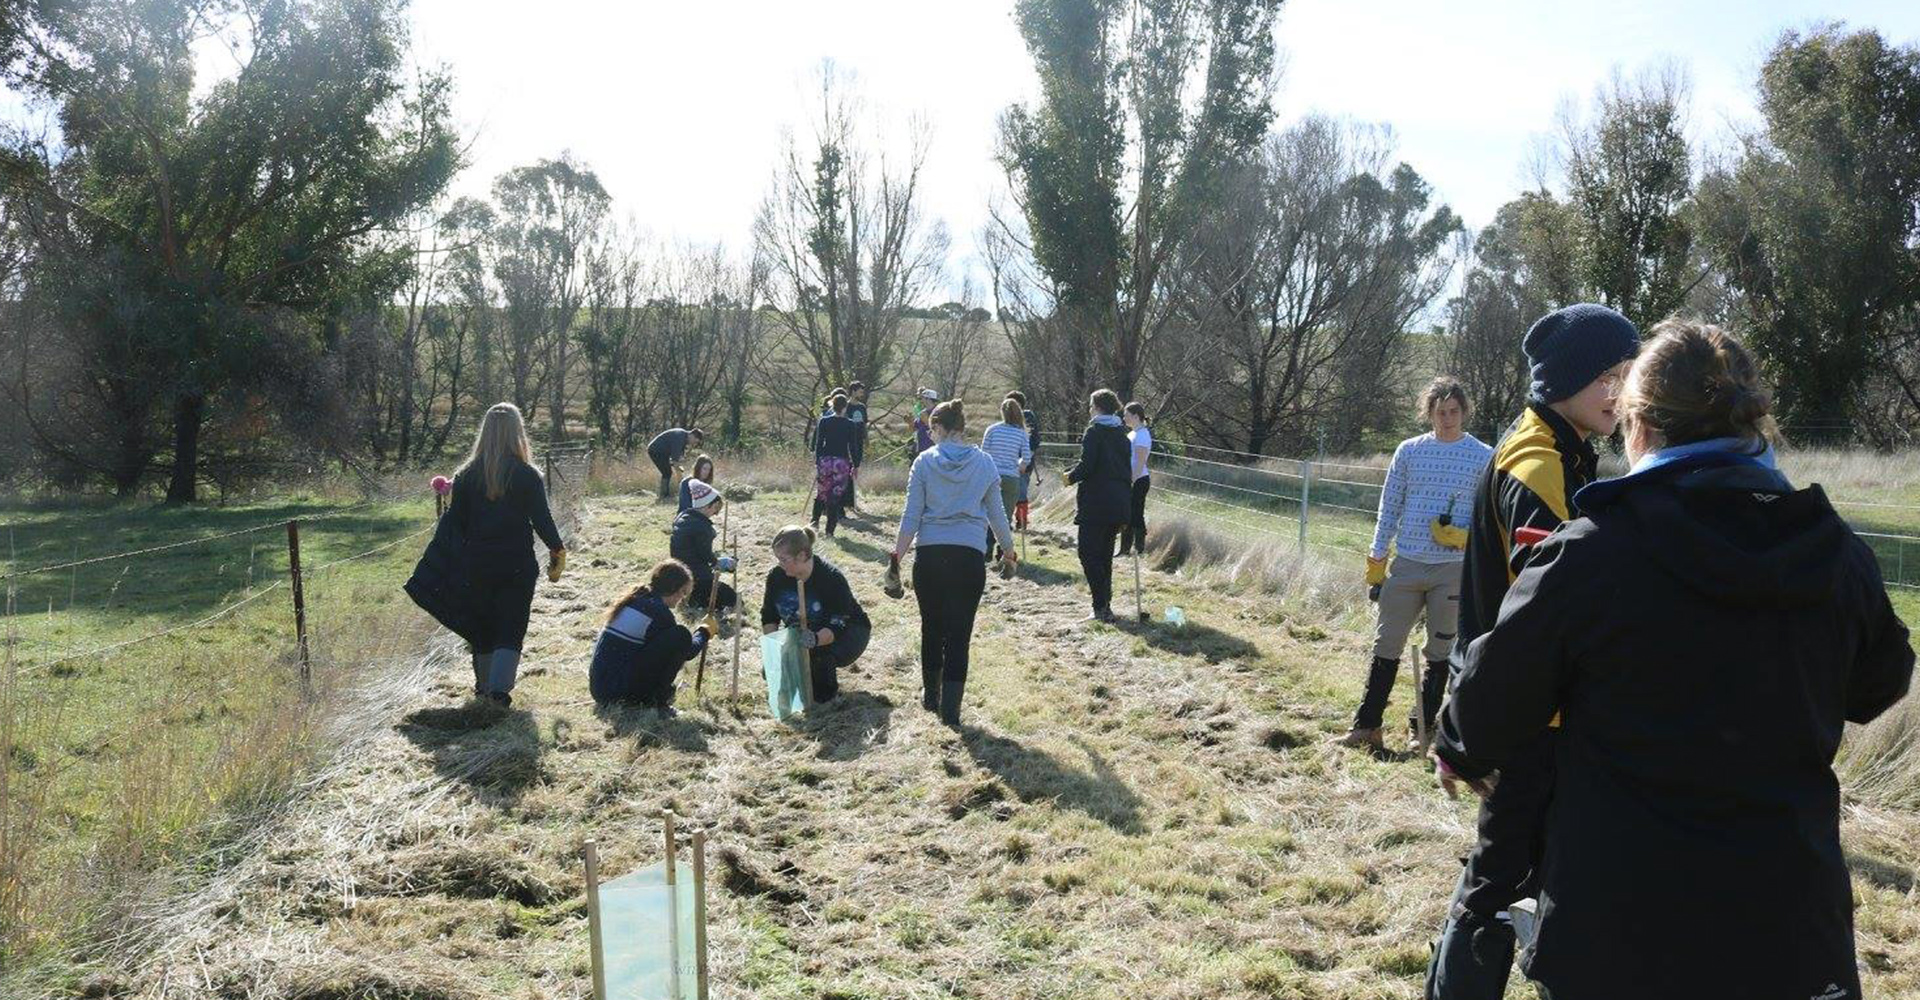 Young Rural Leaders program participants planting trees in nature.